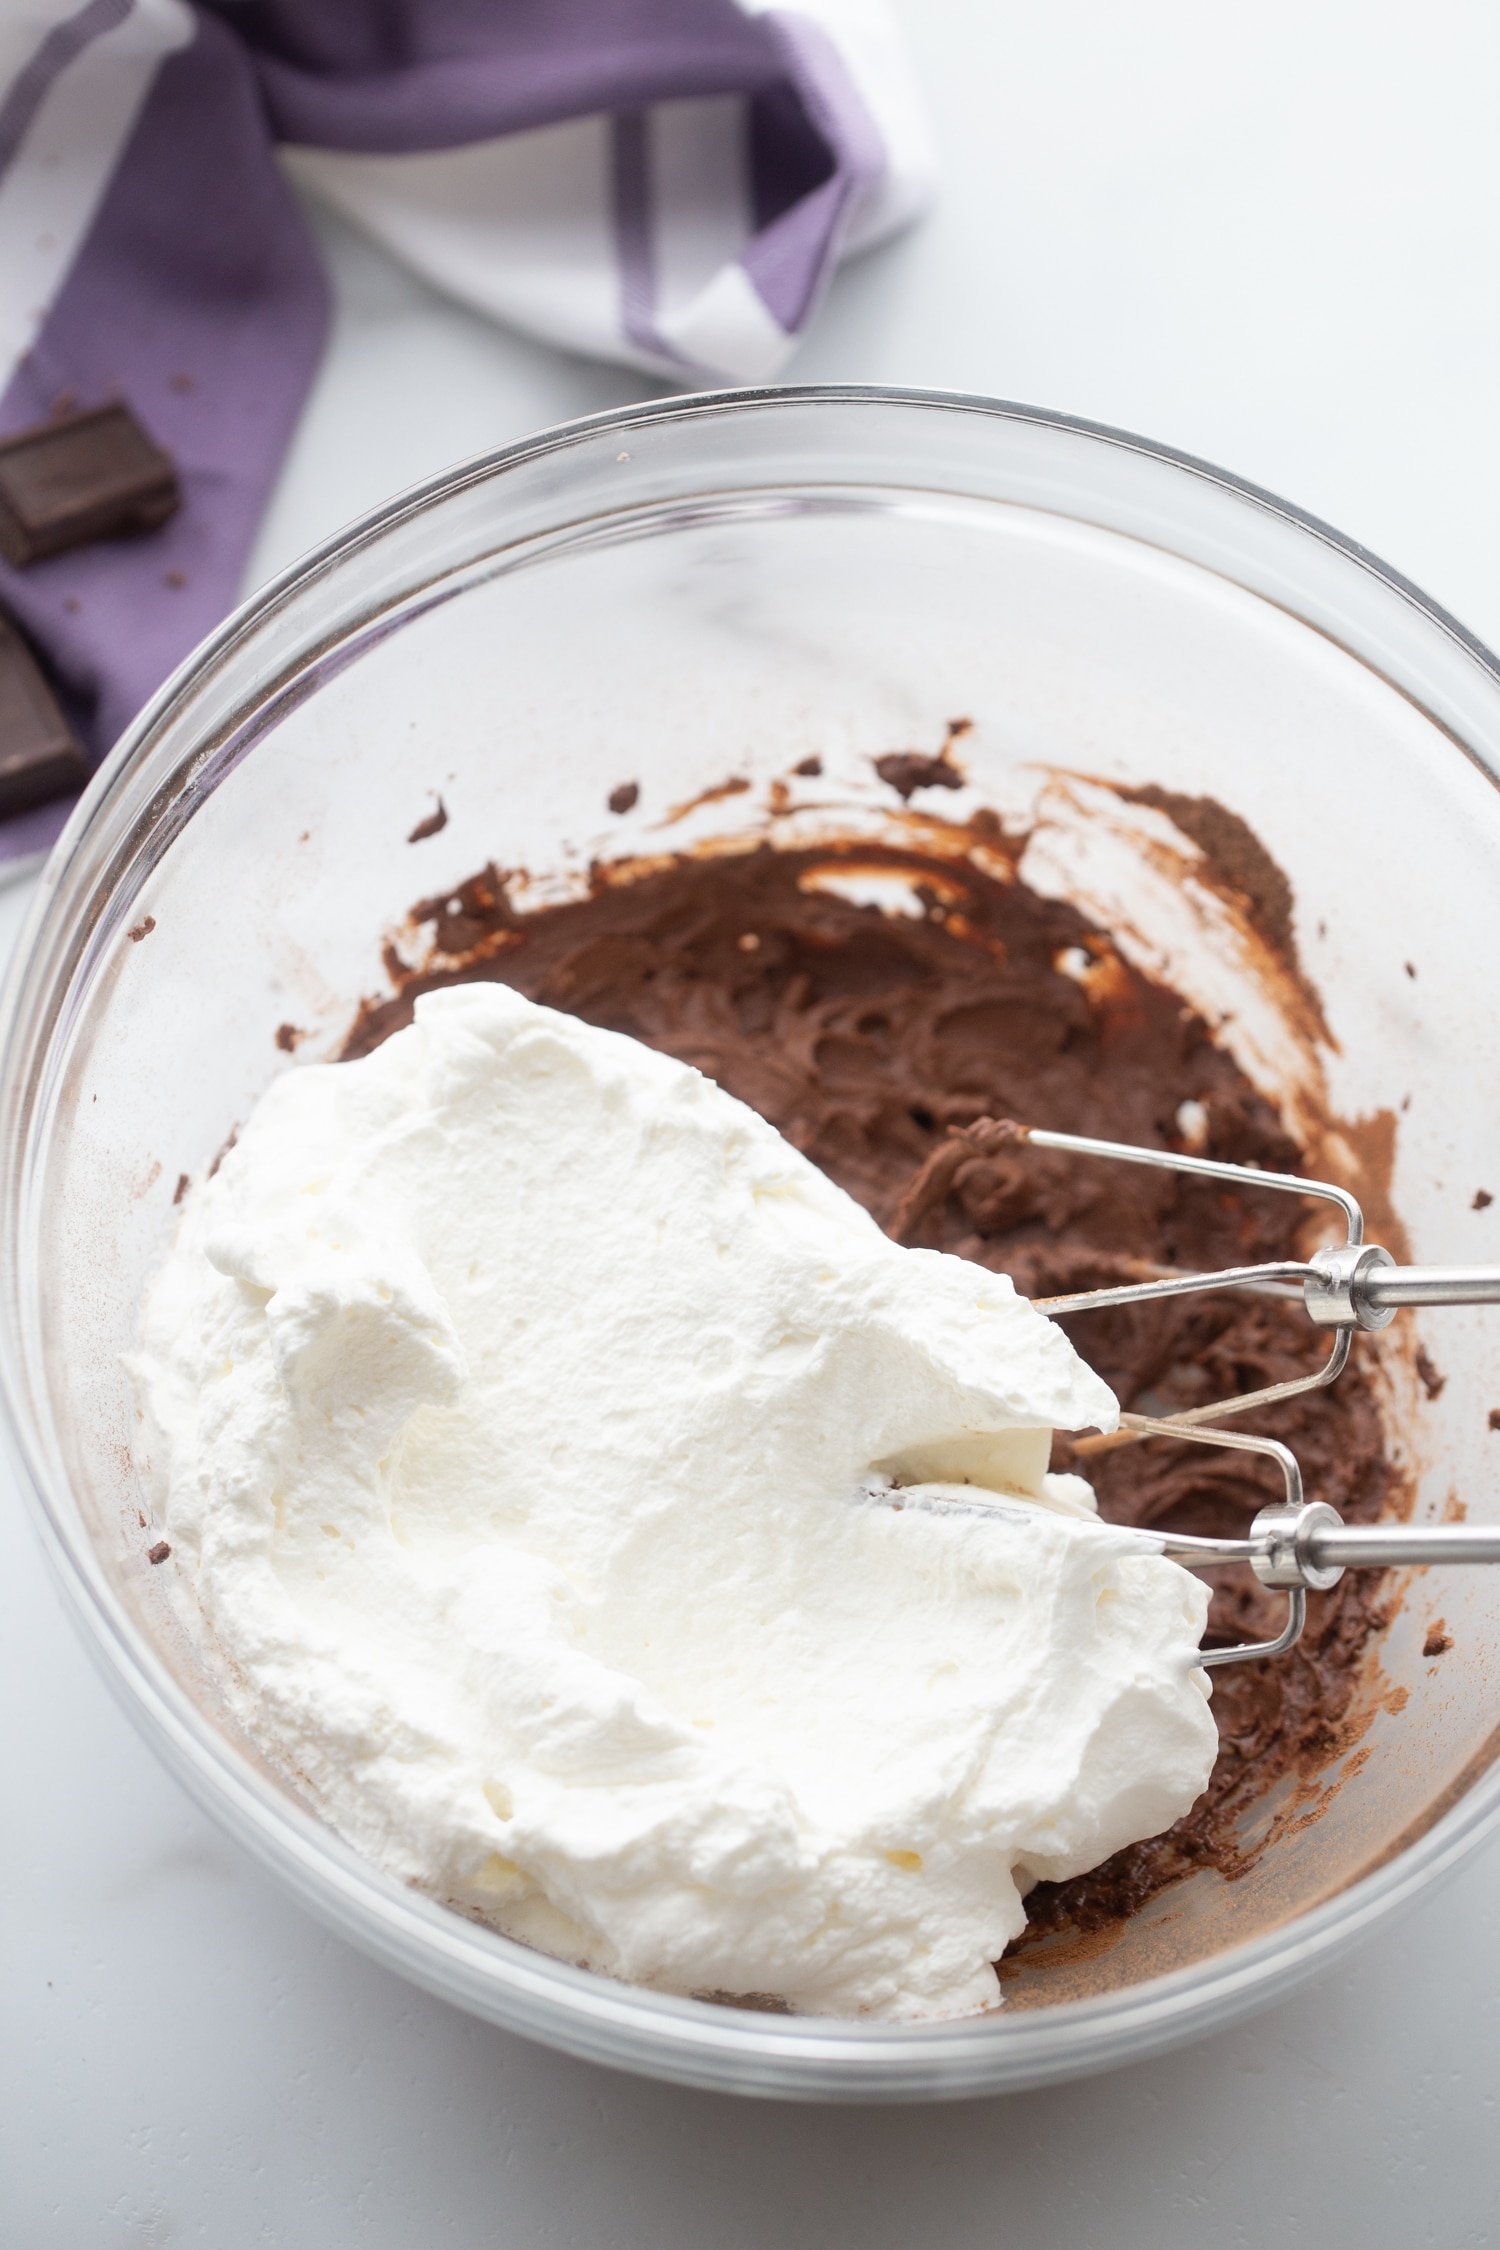 Image of whipped cream mixture being folded into chocolate mouse in glass mixing bowl